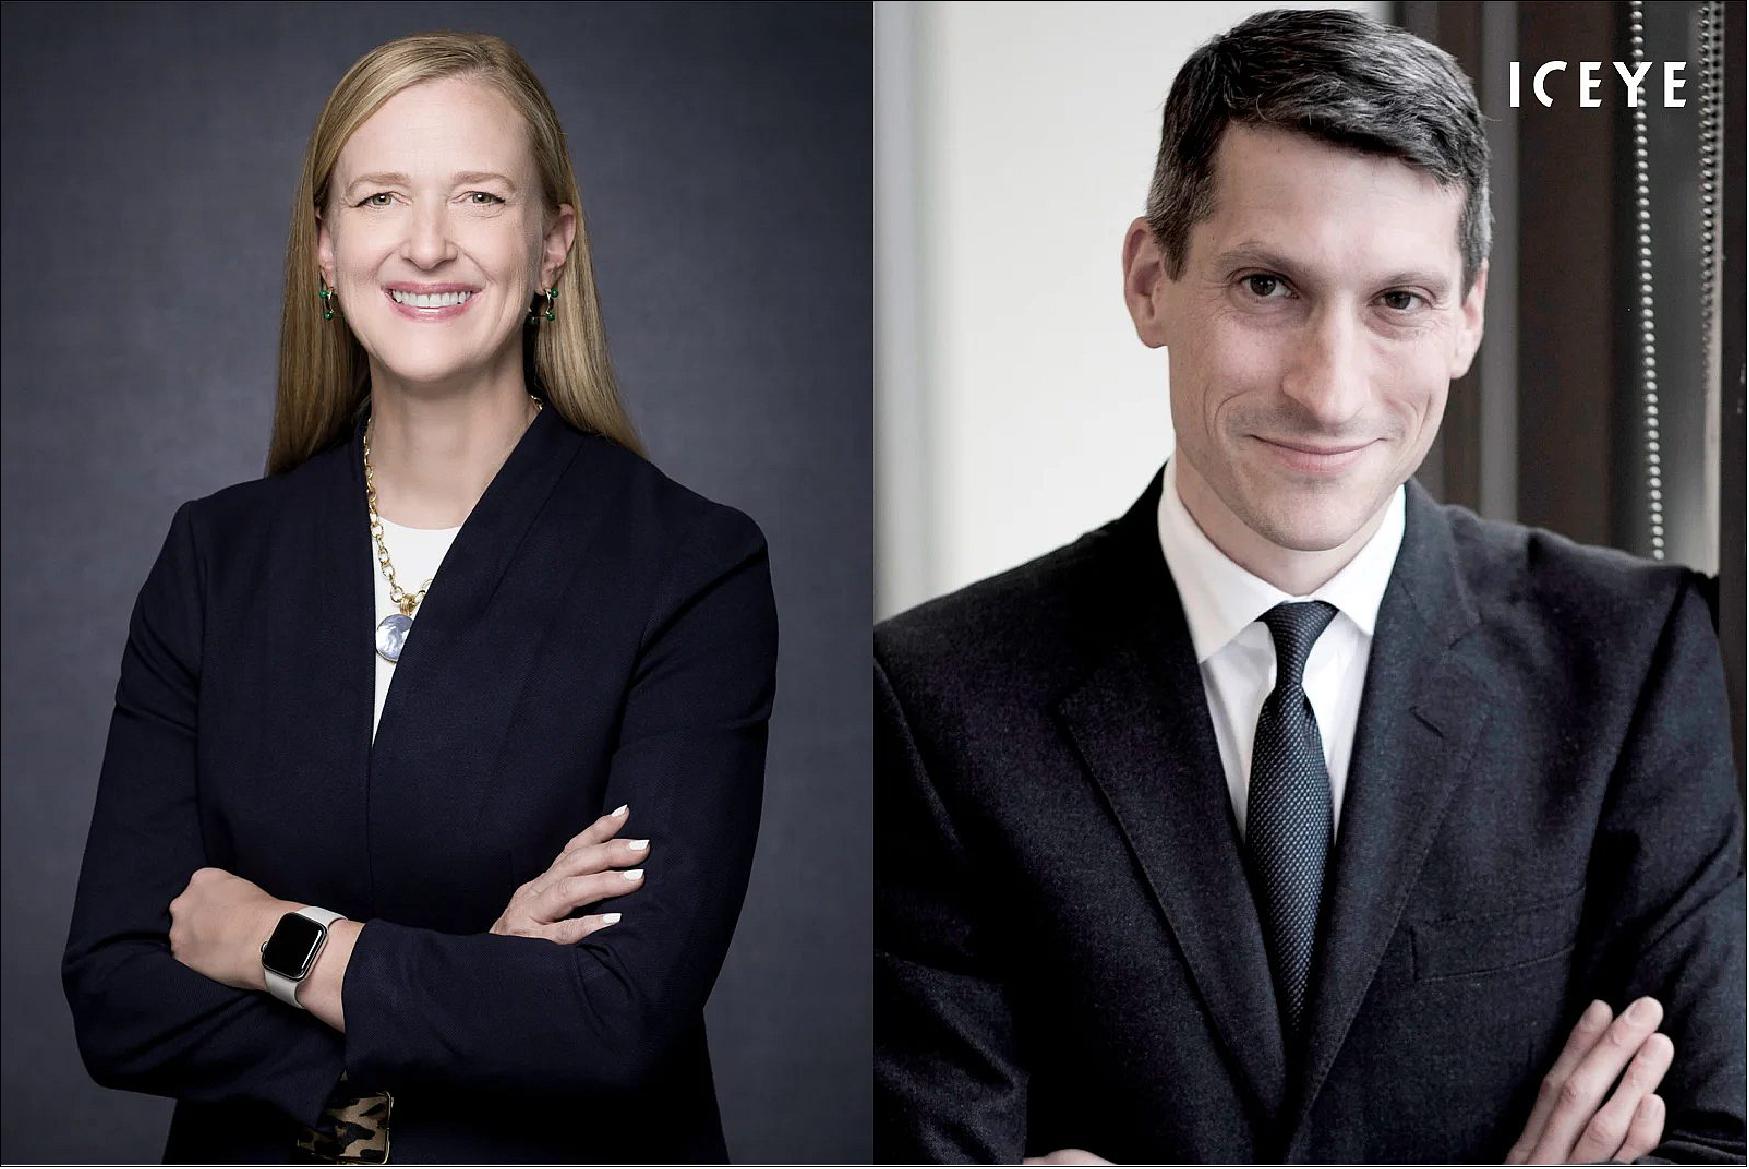 Figure 25: Insurance market strategy and innovation specialist, Lisa Wardlaw, joins ICEYE; Daniel Stander announced as Senior Advisor (image credit: ICEYE)